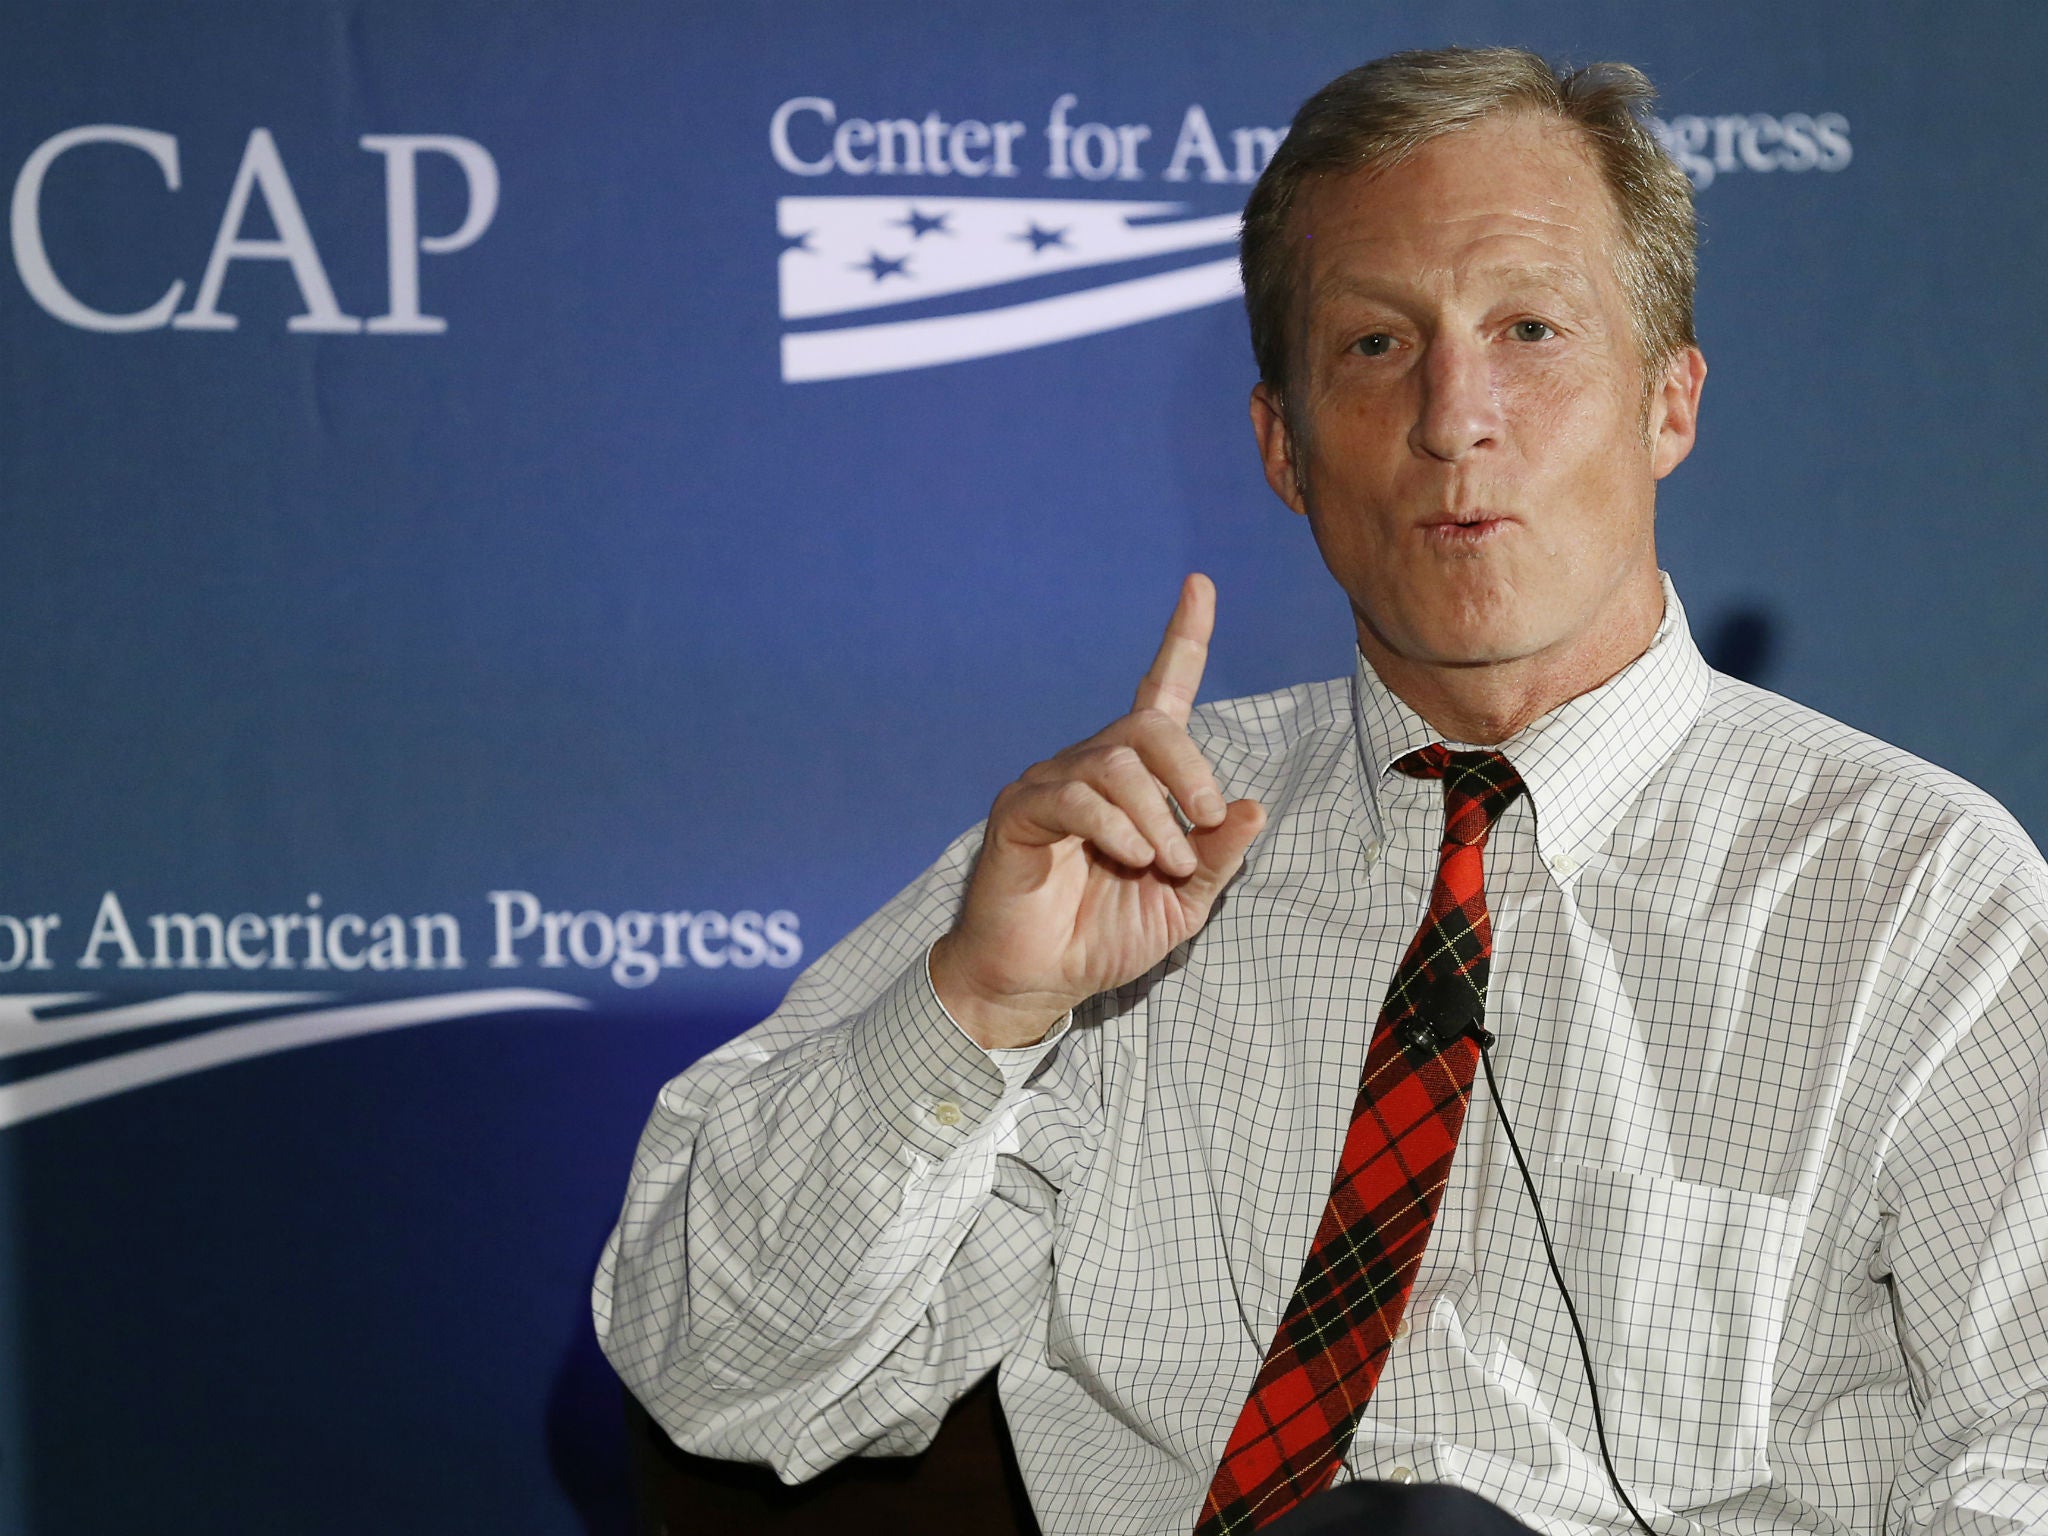 Tom Steyer, seen here at the Center for American Progress in Washington, DC, U.S. on November 19, 2014, is spending millions to impeach Donald Trump